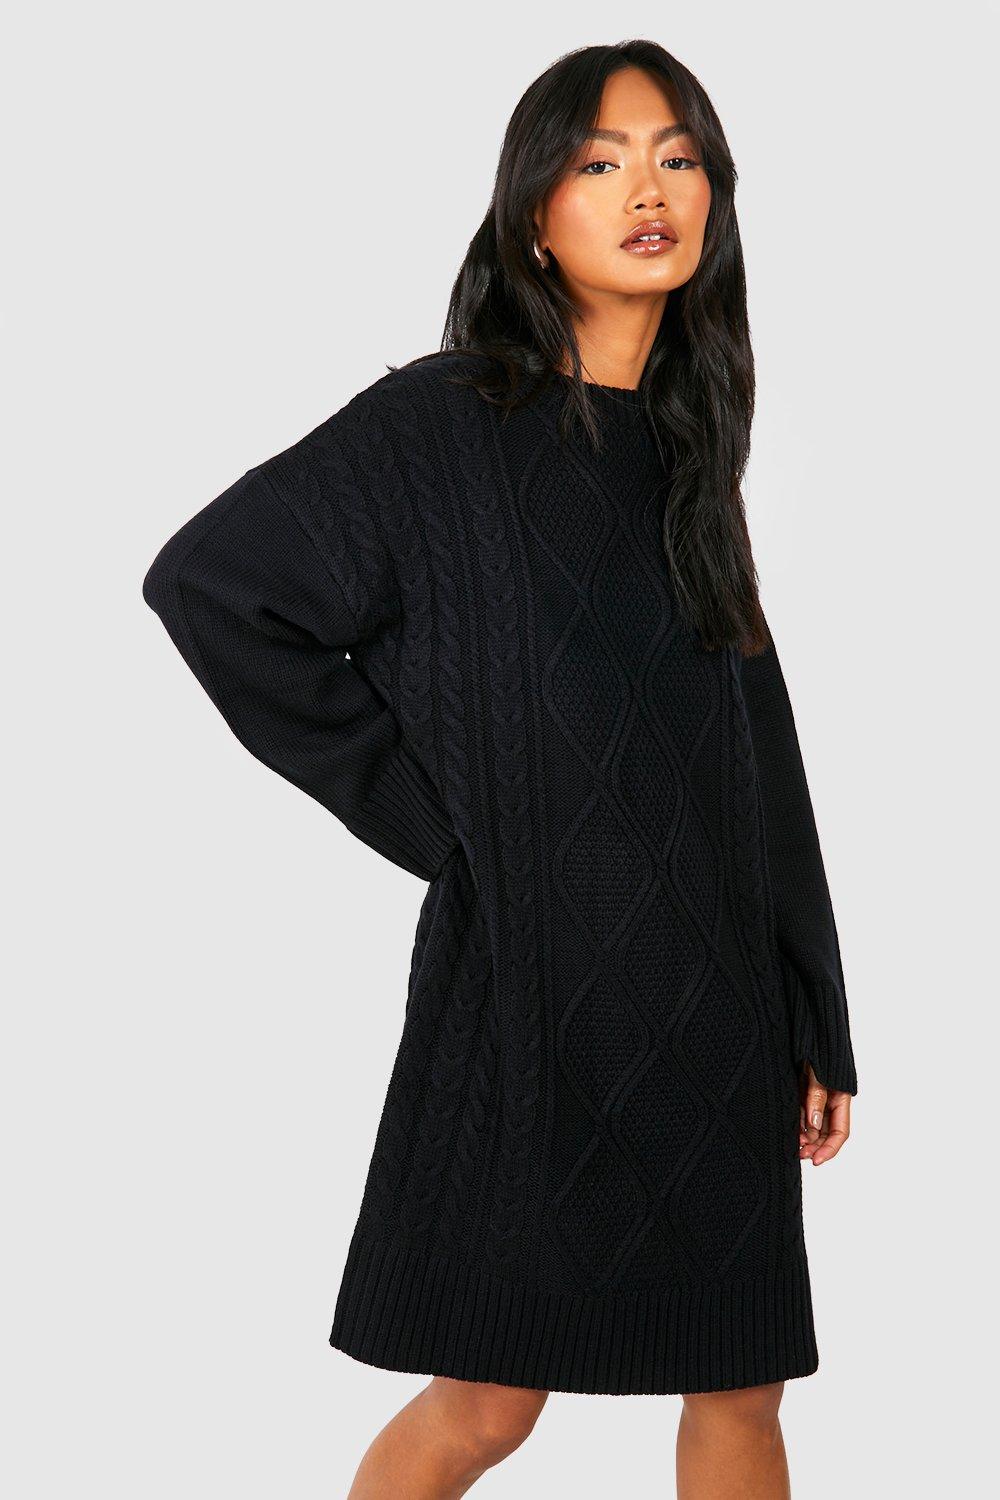 Women's Chunky Oversized Cable Knit Jumper Dress